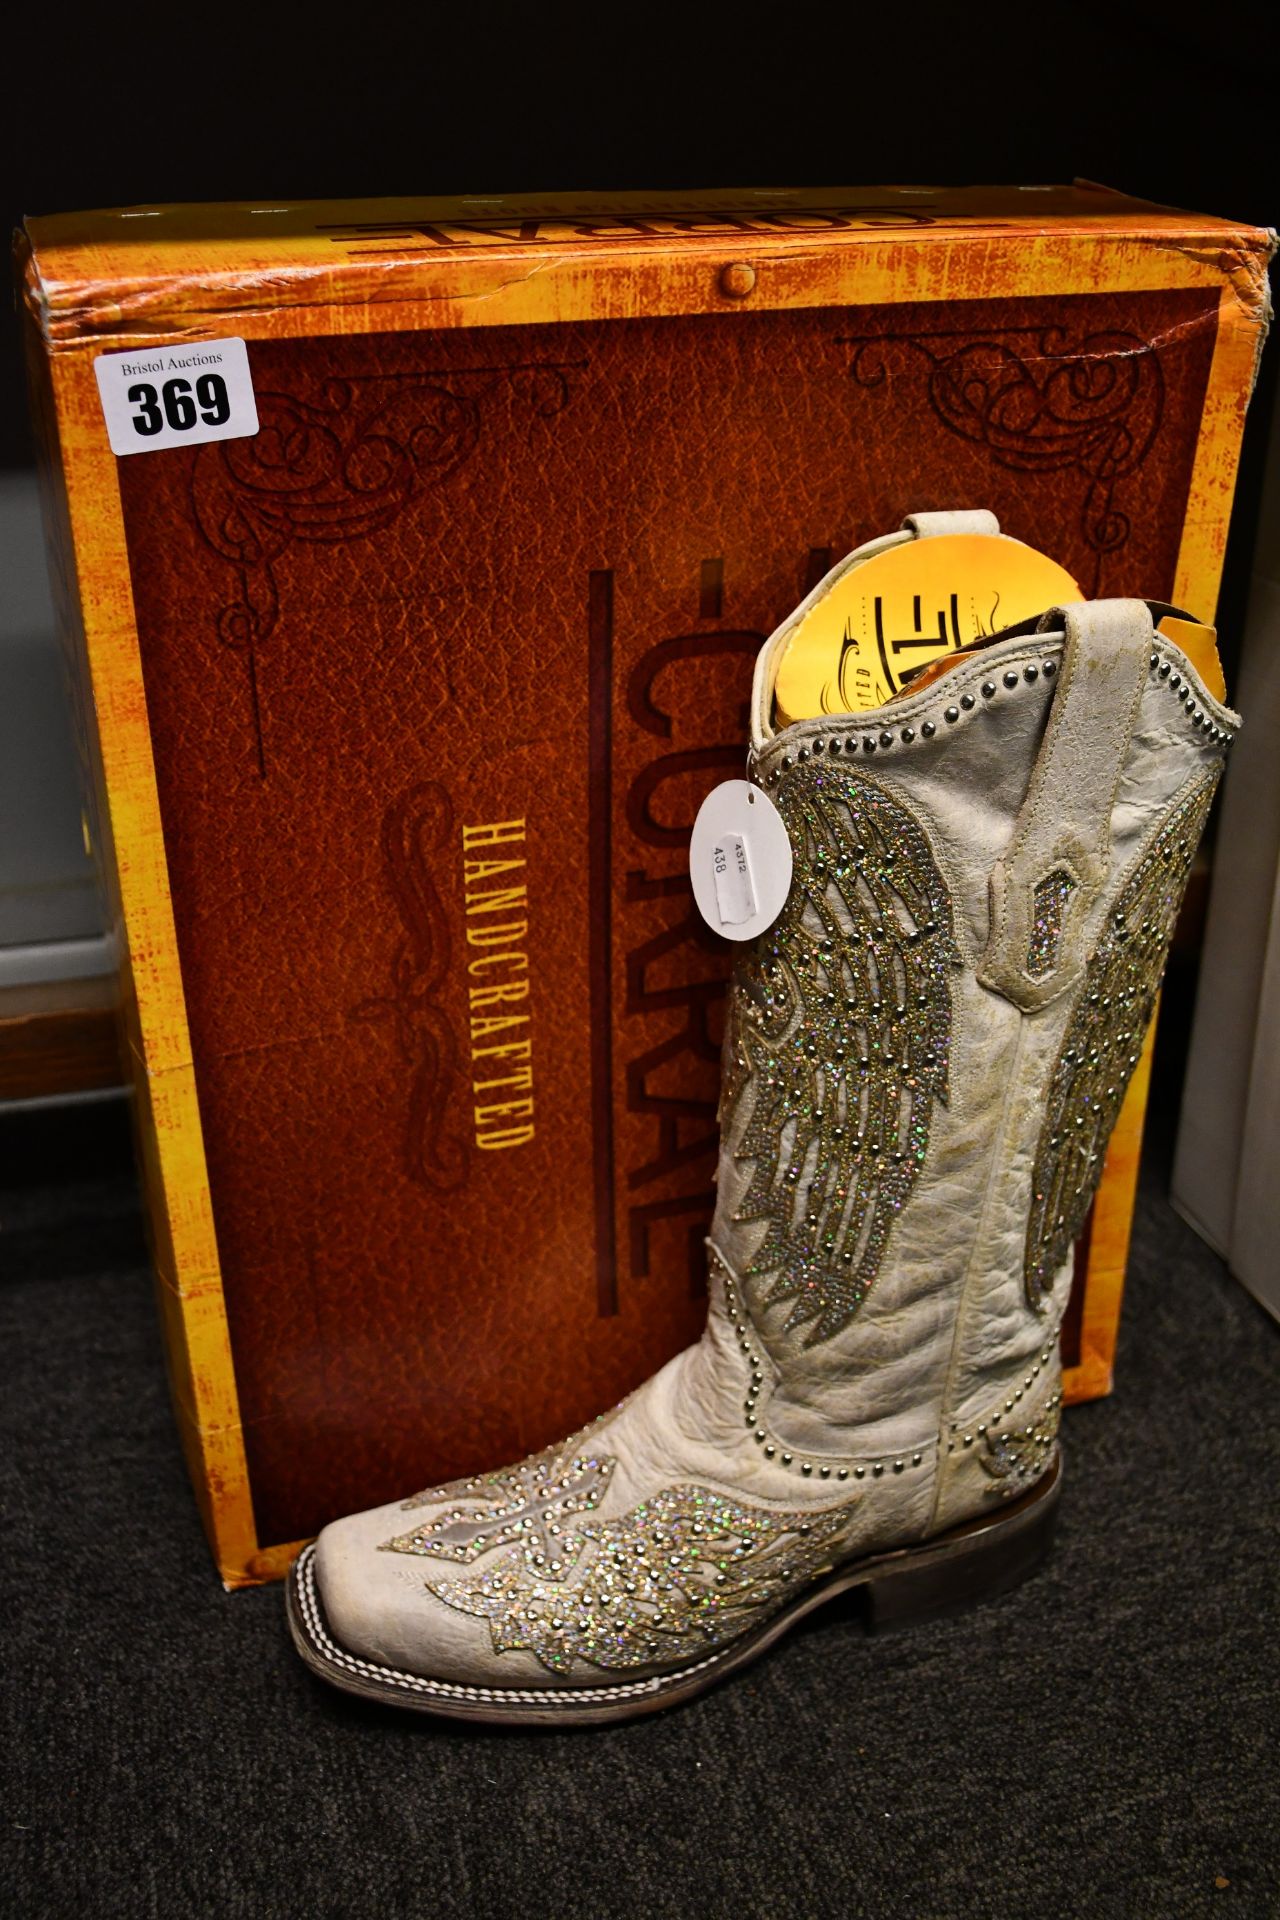 A pair of women's as new Corral White Cross & Wings boots (US 7.5 - RRP $192).